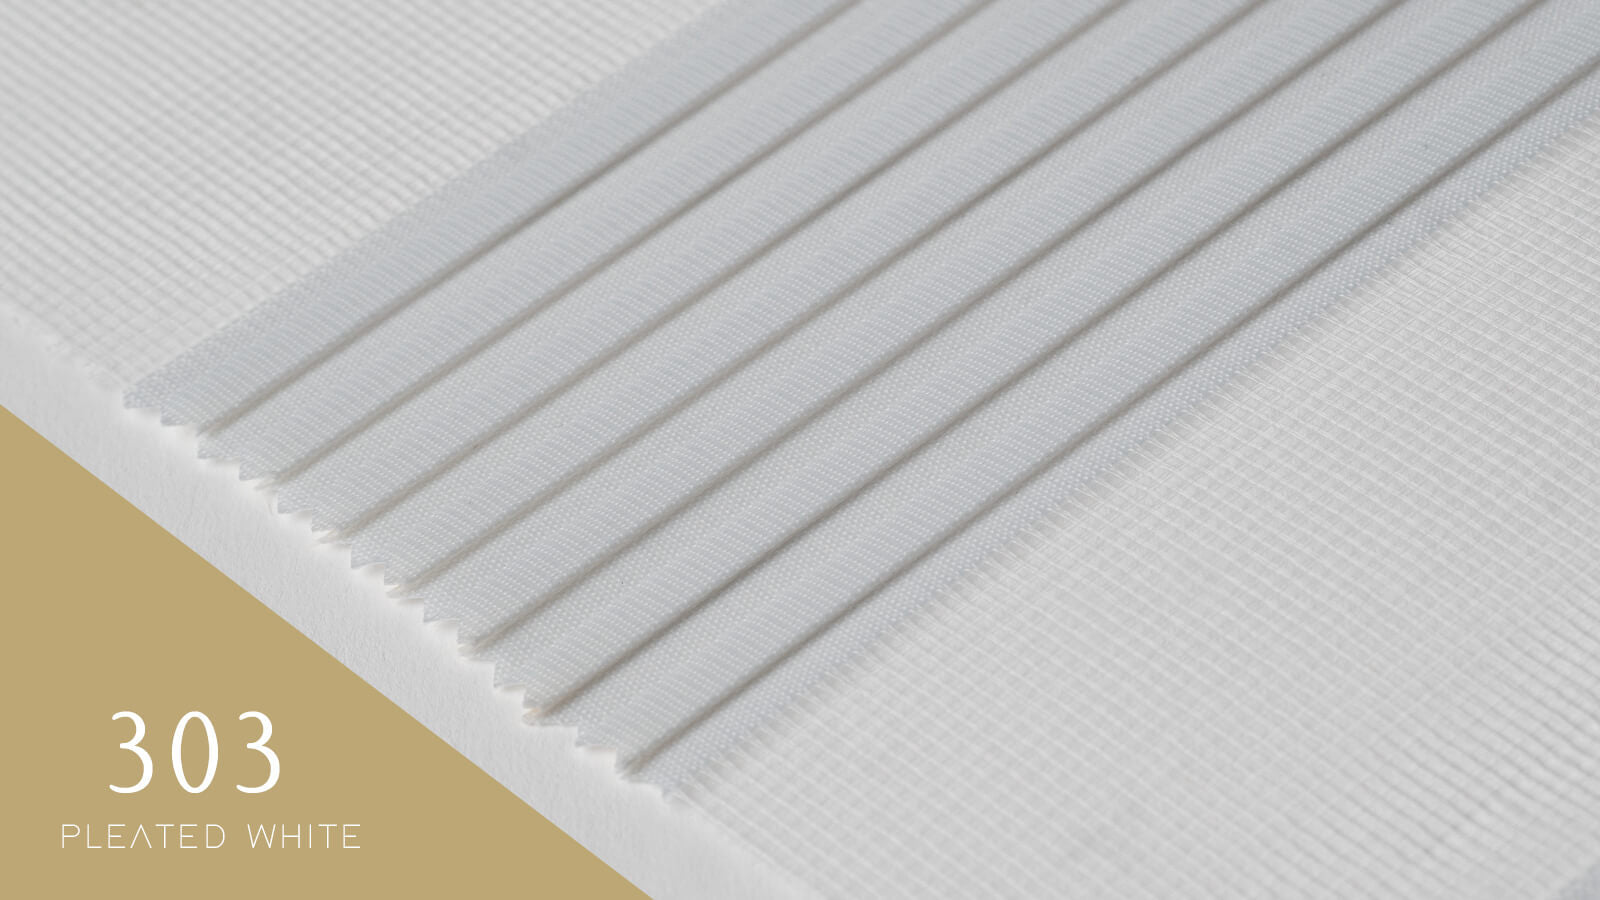 Decor Blinds Privacy 303 Pleated White